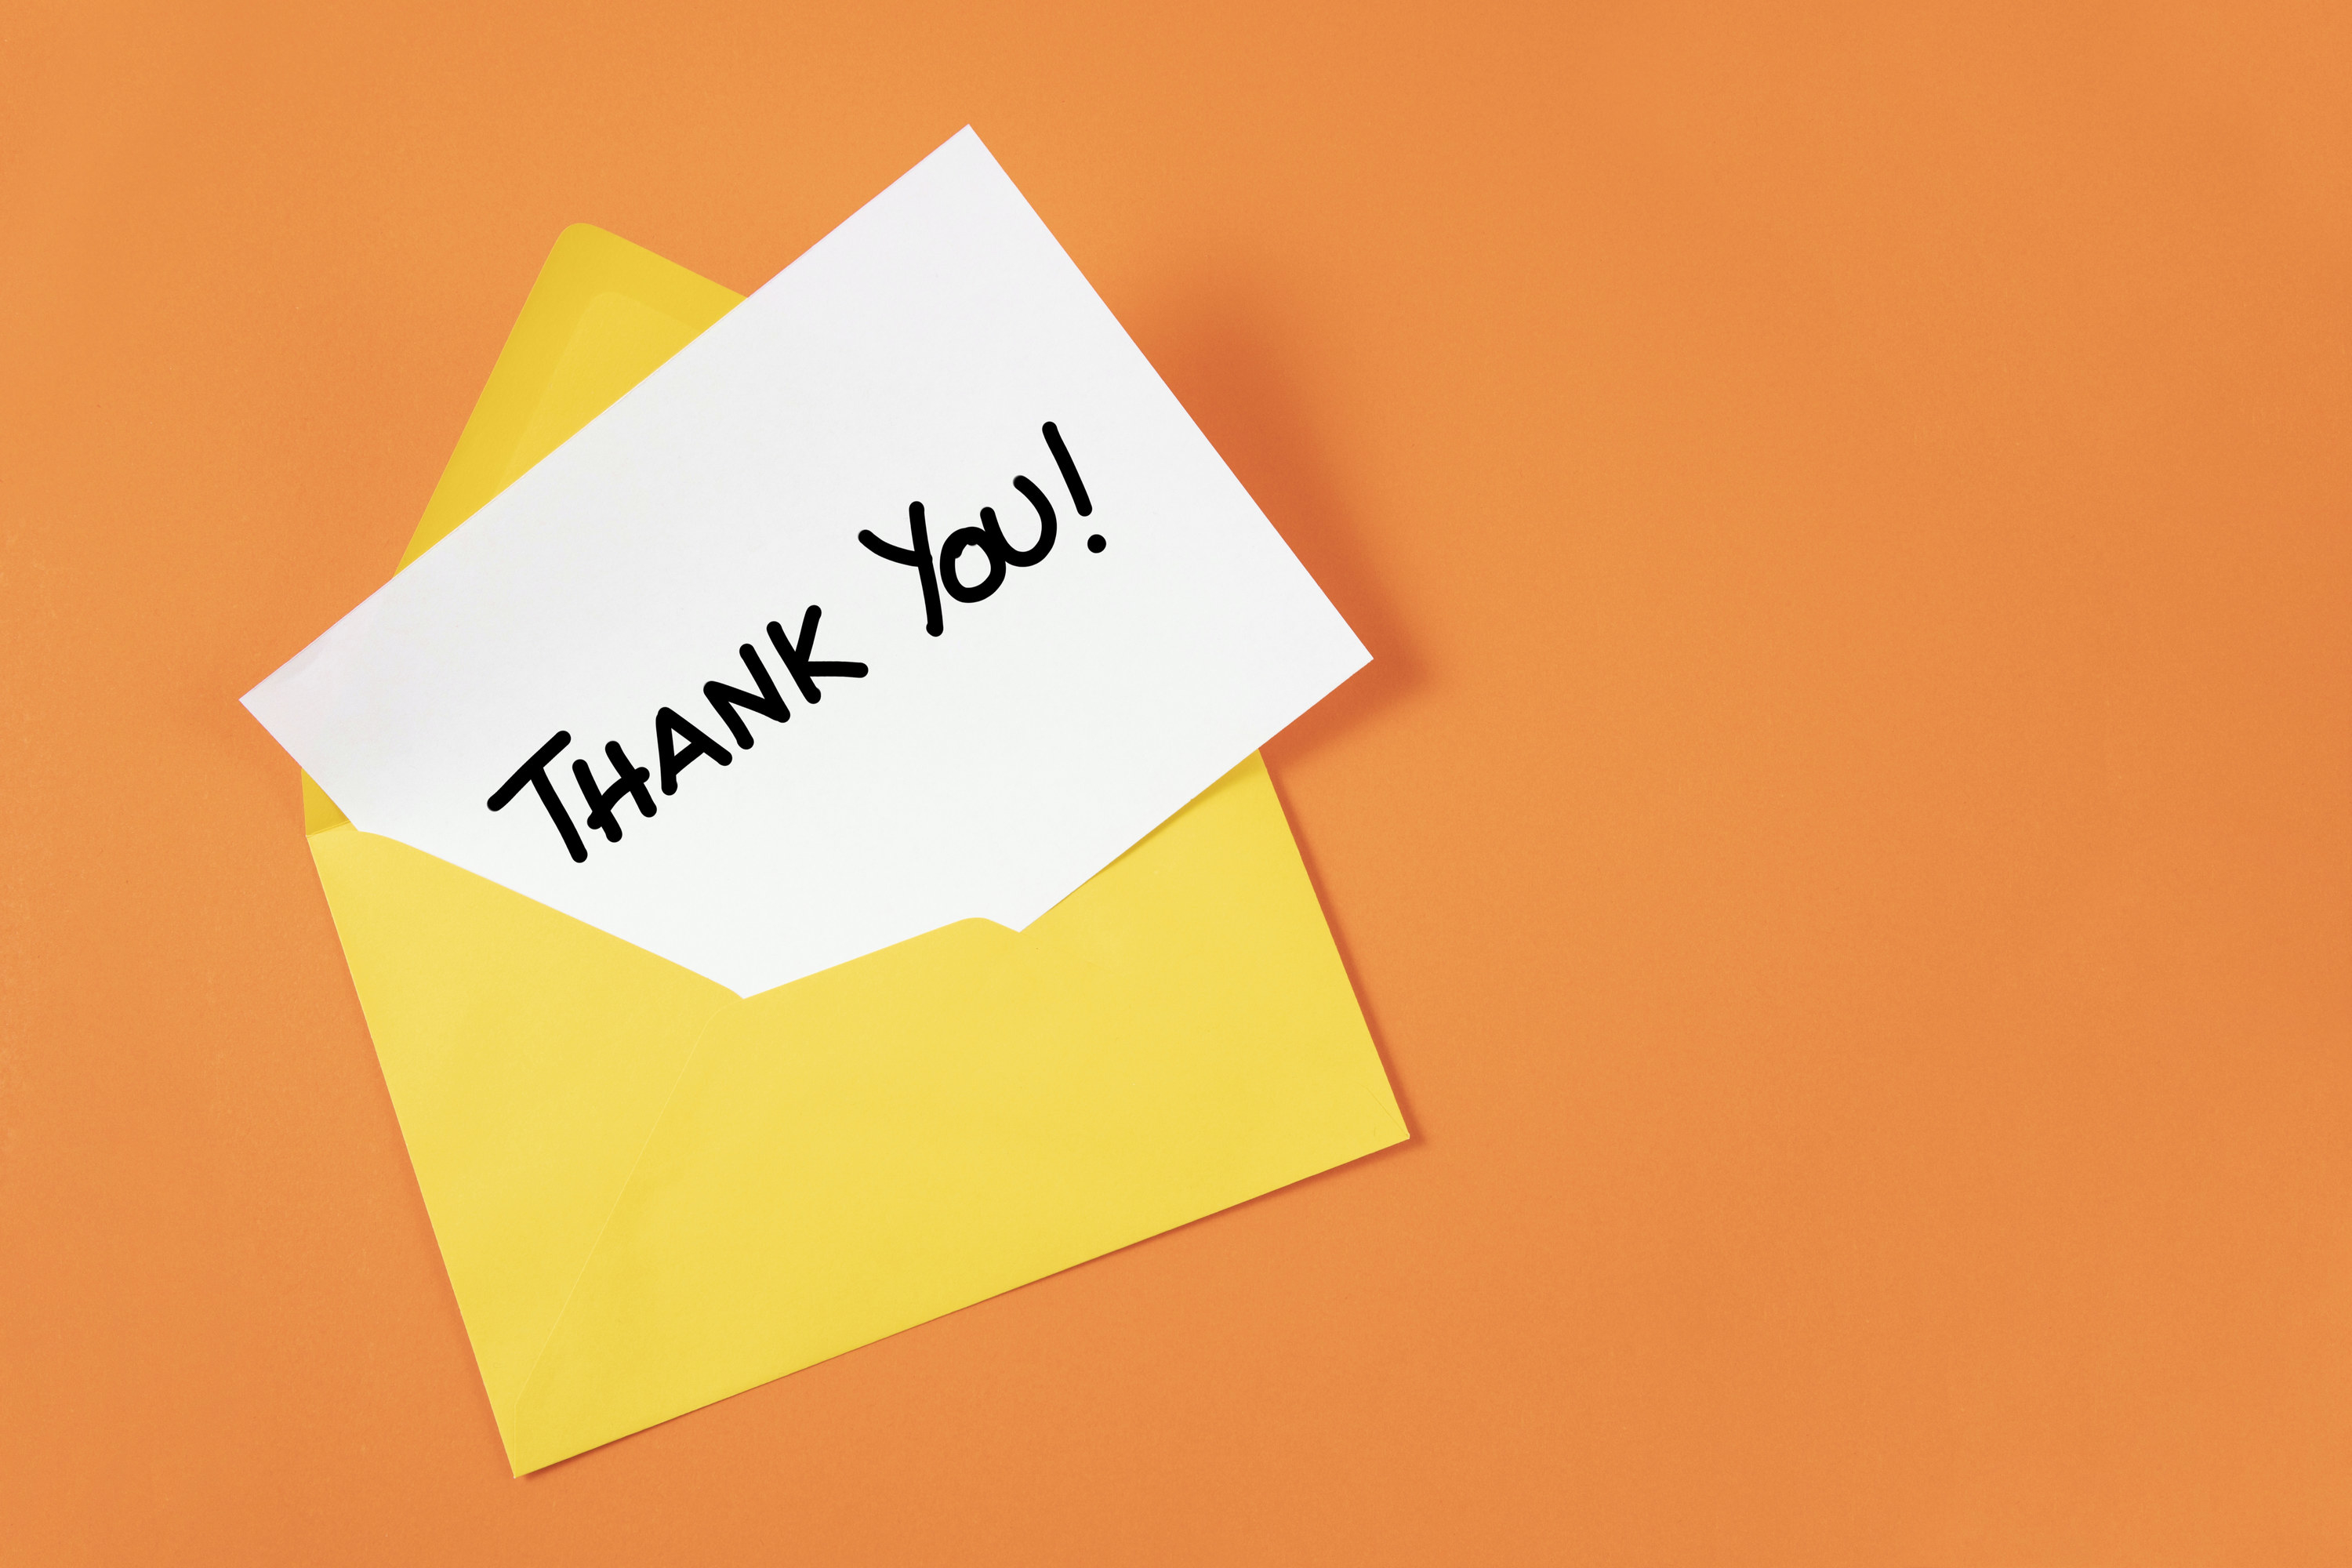 A white note coming out of a yellow envelope that says &quot;thank you&quot; against an orange background